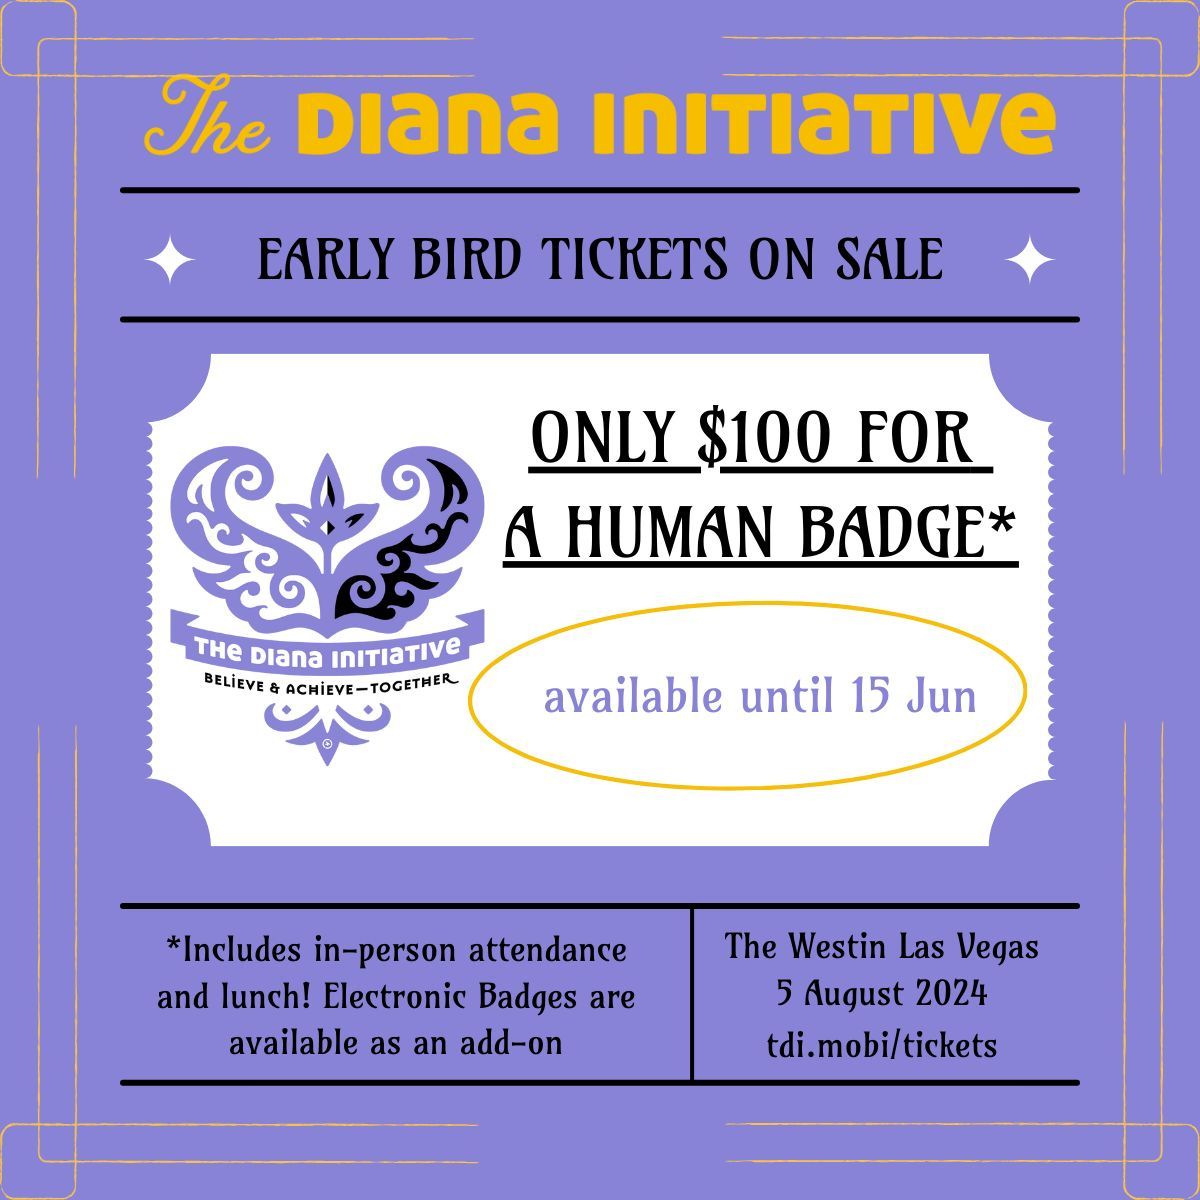 Tickets for #TDI2024 are on sale now! Things to know - Early bird price of $100 until June 15! - Lunch included - Limited edition e-badge add-on! - Student discounted tickets - Only $49! - Free tickets for veterans available! buff.ly/48GKwIy #LiftWhileYouClimb